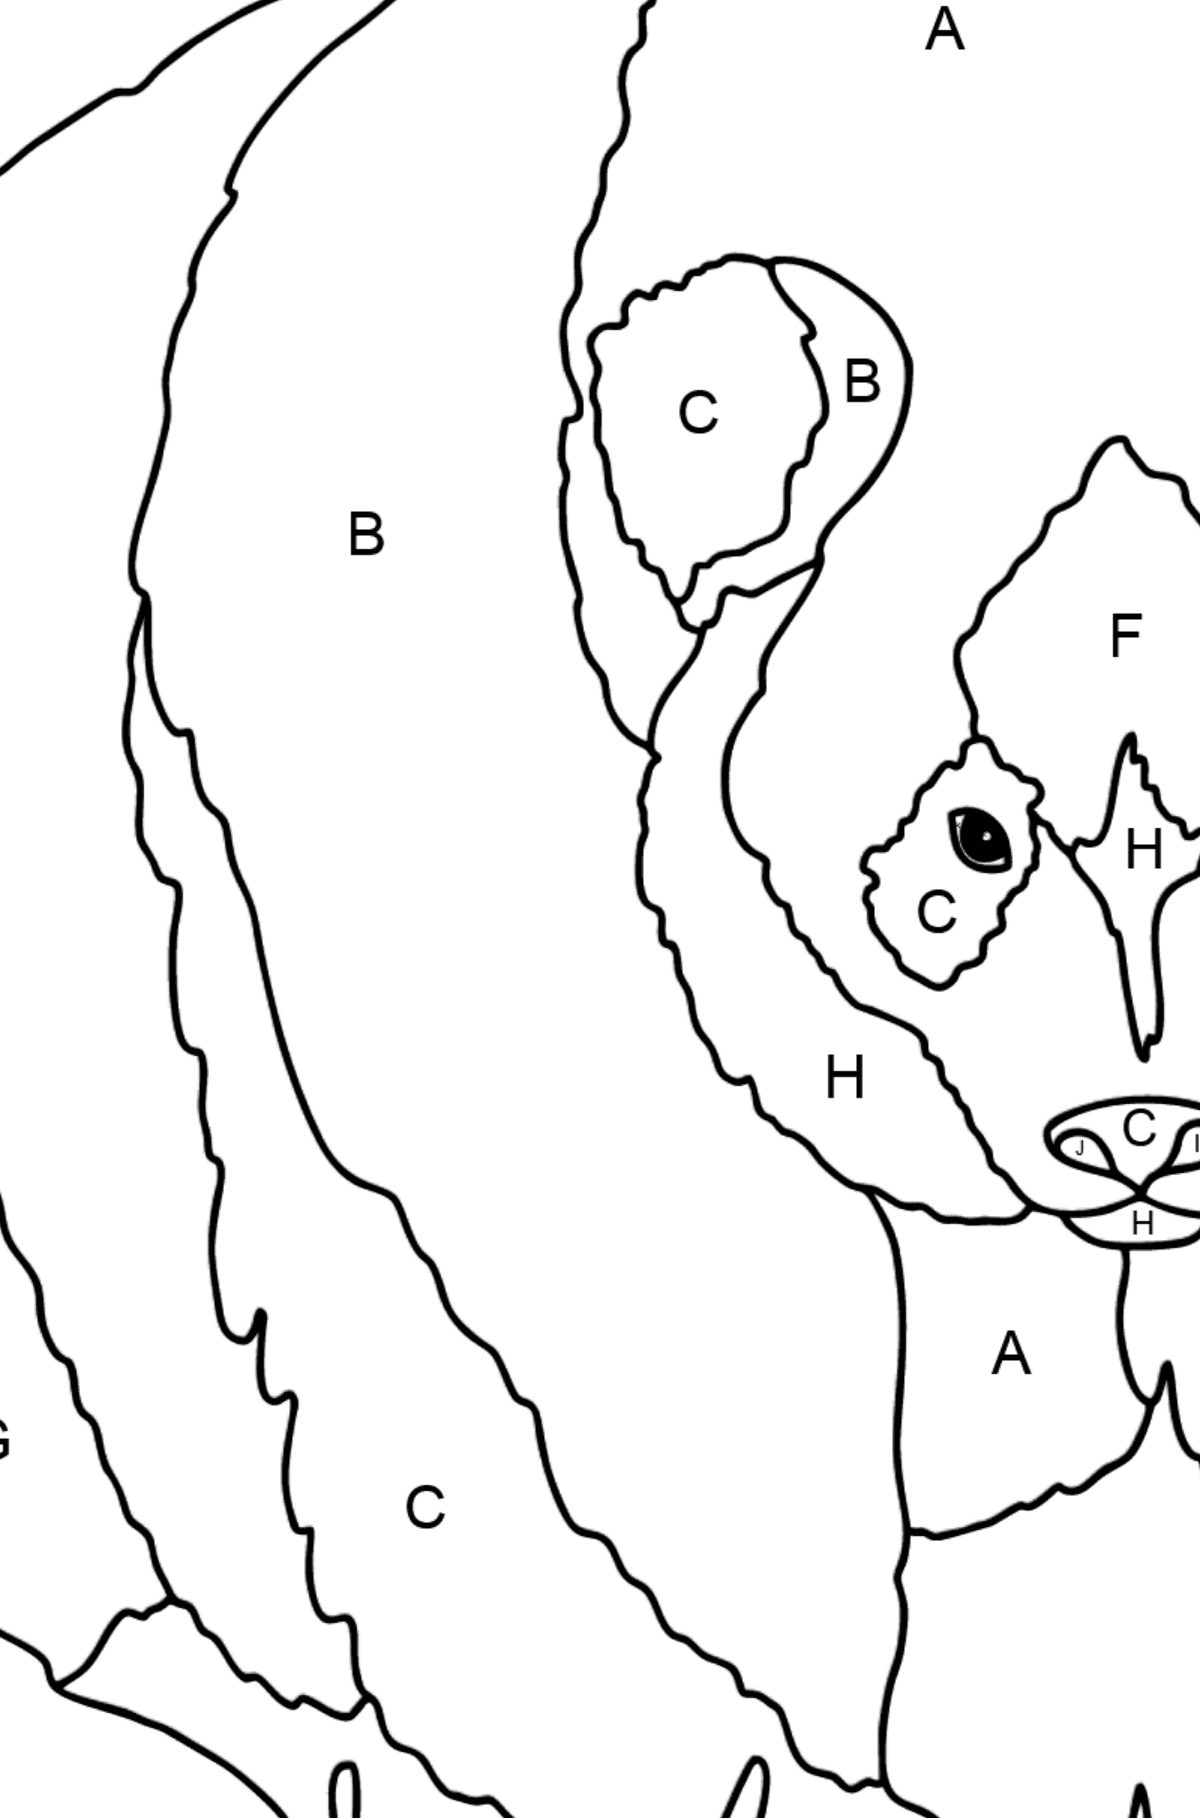 Coloring Page - A Panda is on a Hunt - Coloring by Letters for Kids